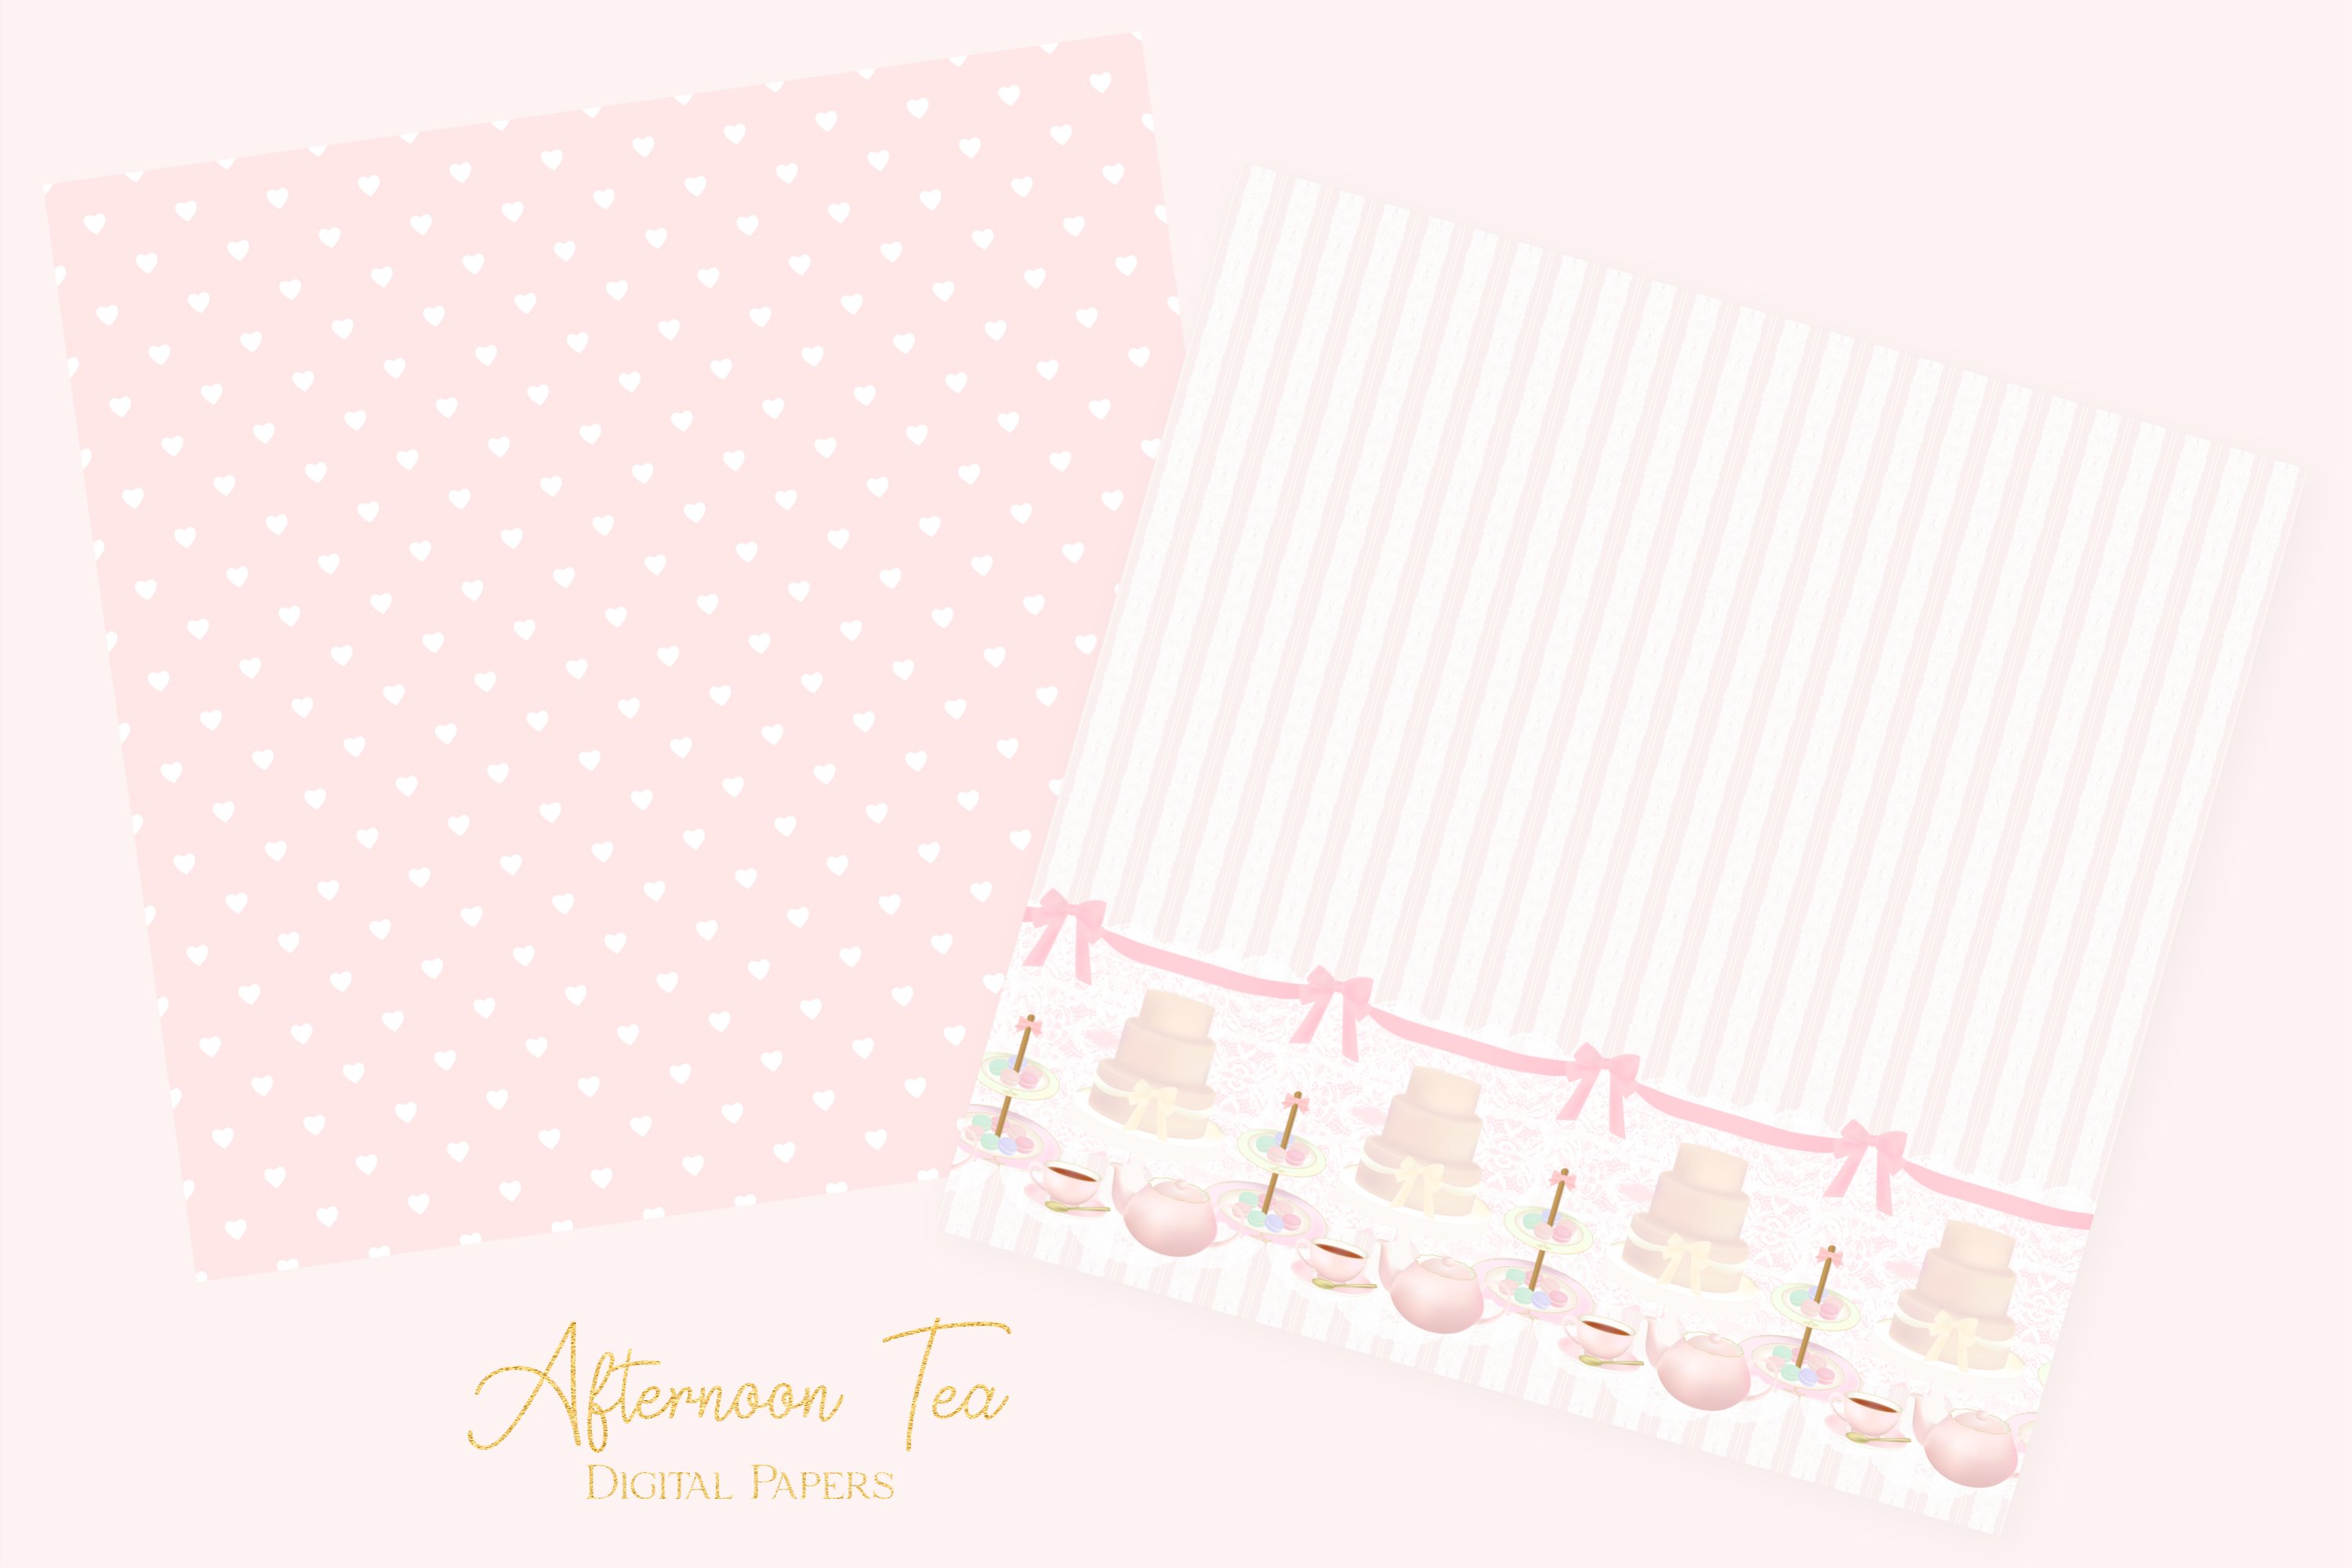 So cute and delicate pastel patterns.